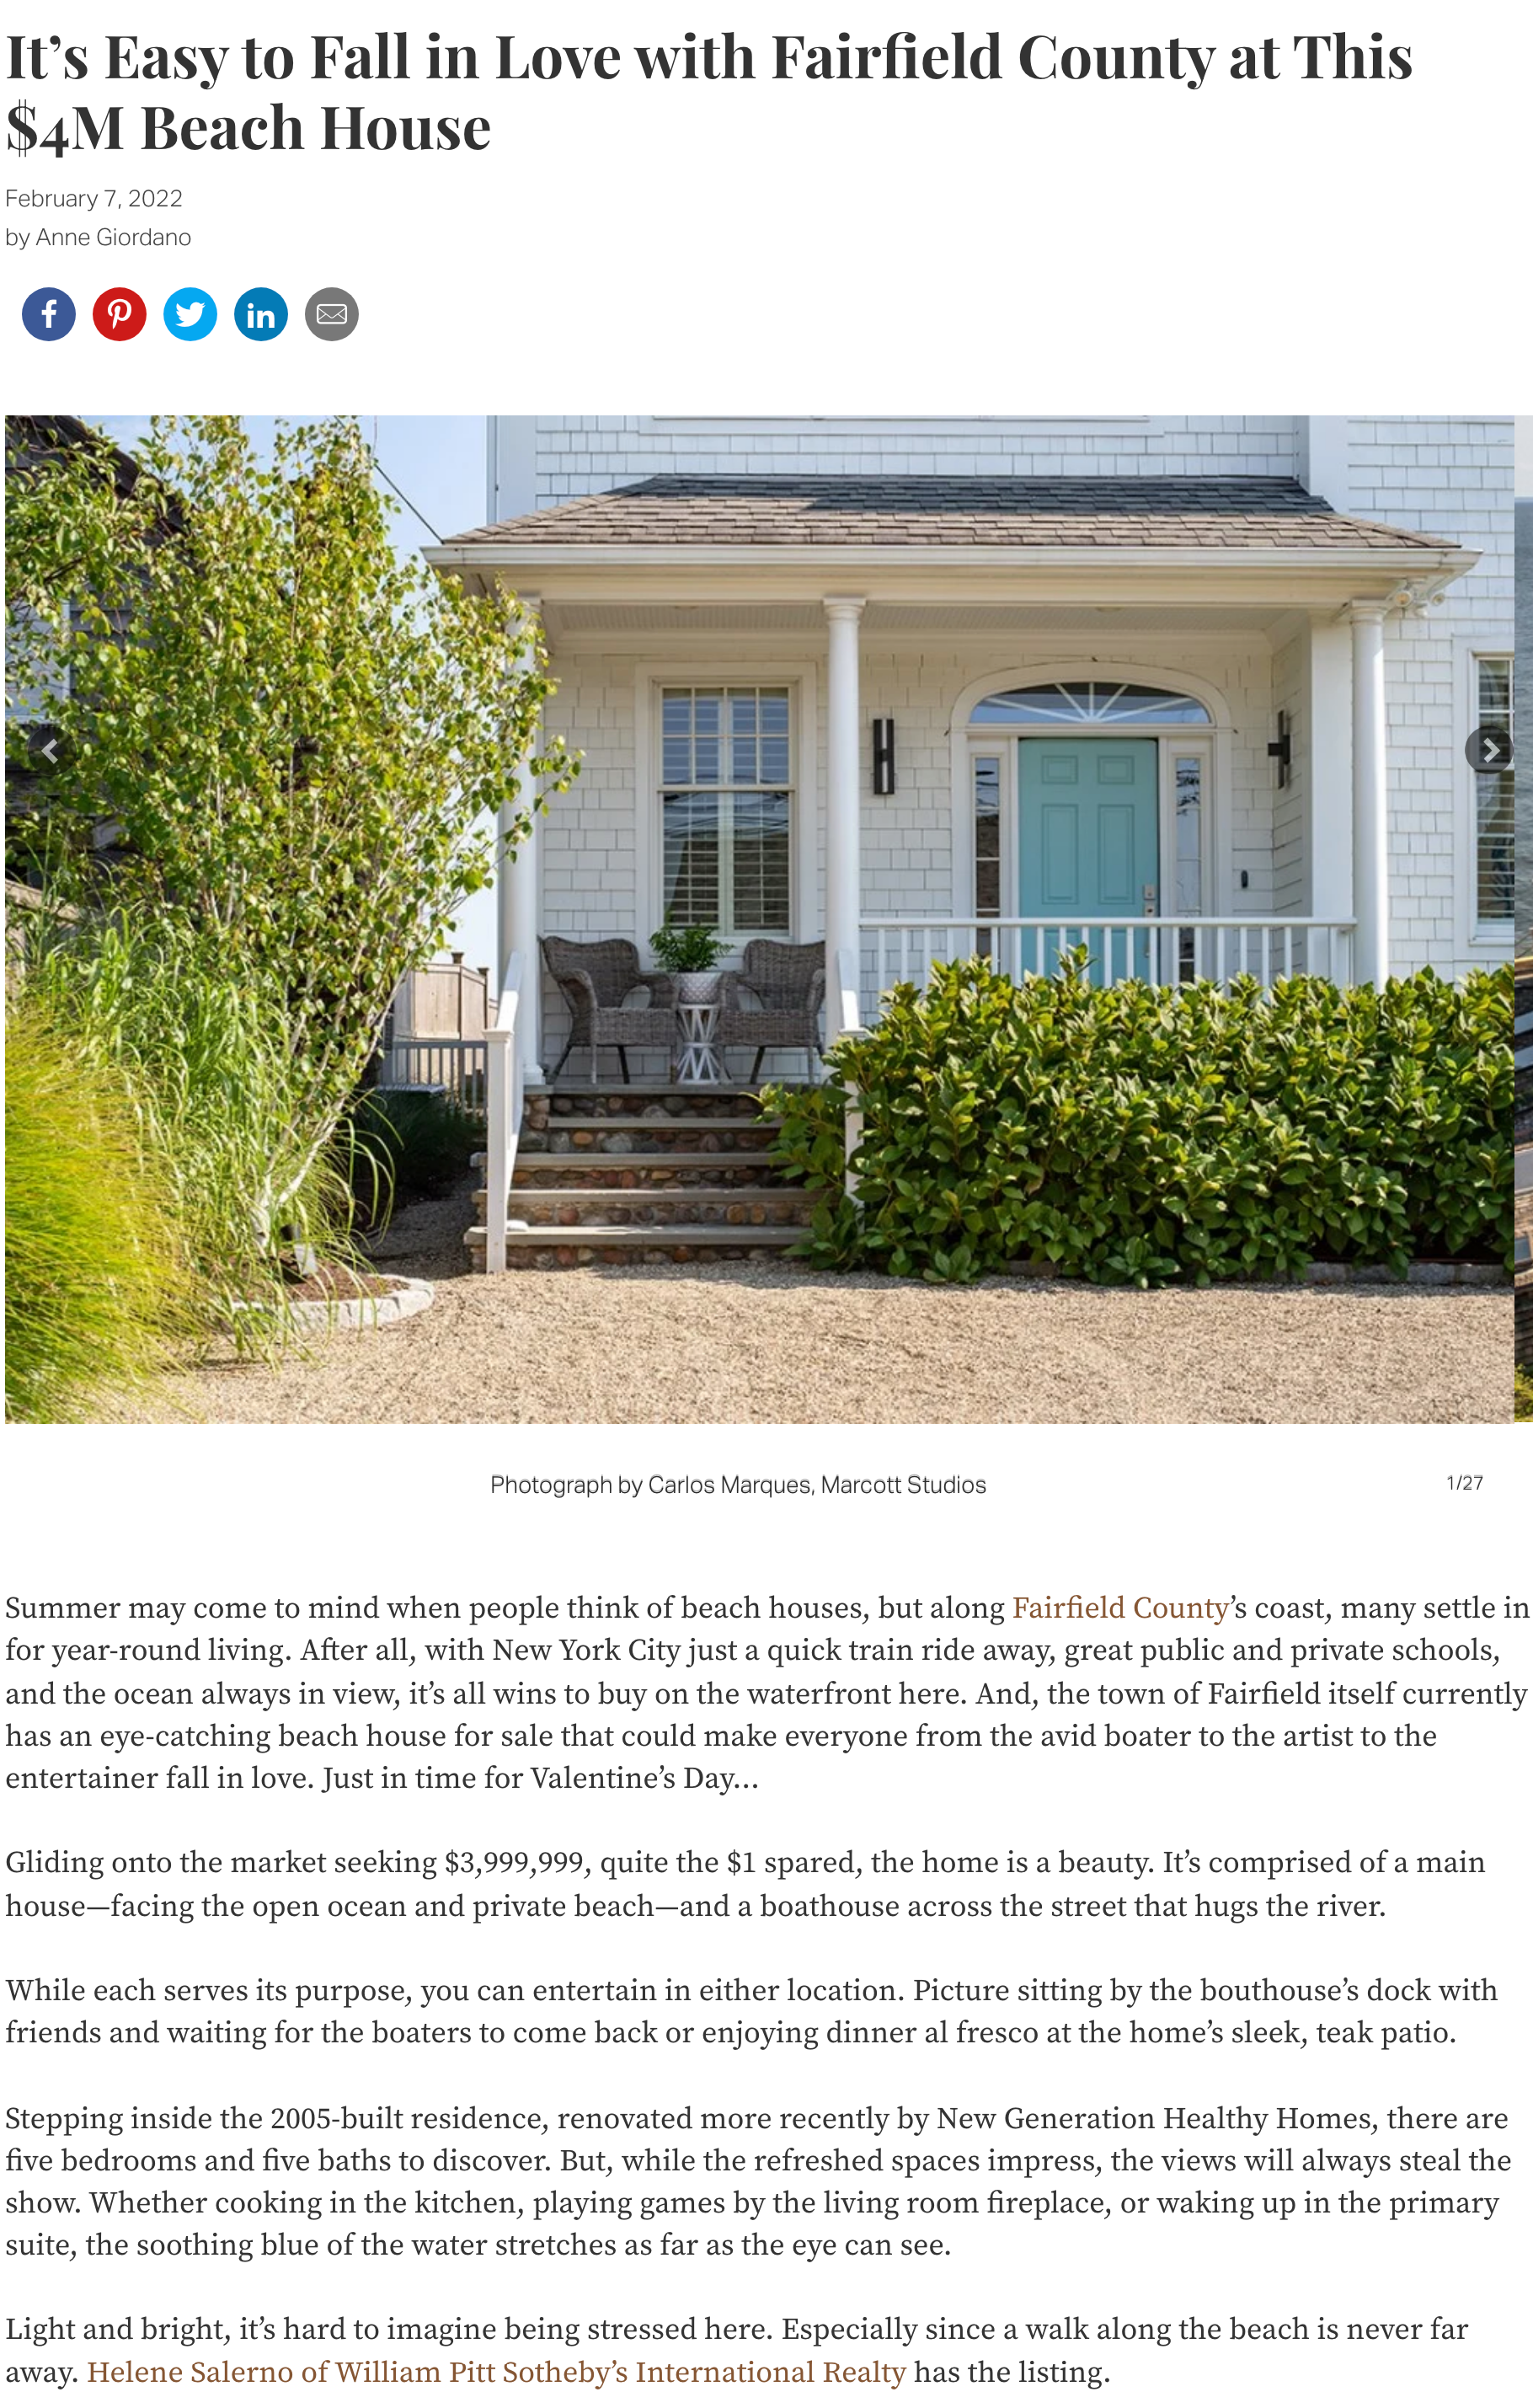 It-s-Easy-to-Fall-in-Love-with-Fairfield-County-at-This-4M-Beach-House-DailyDEEDS